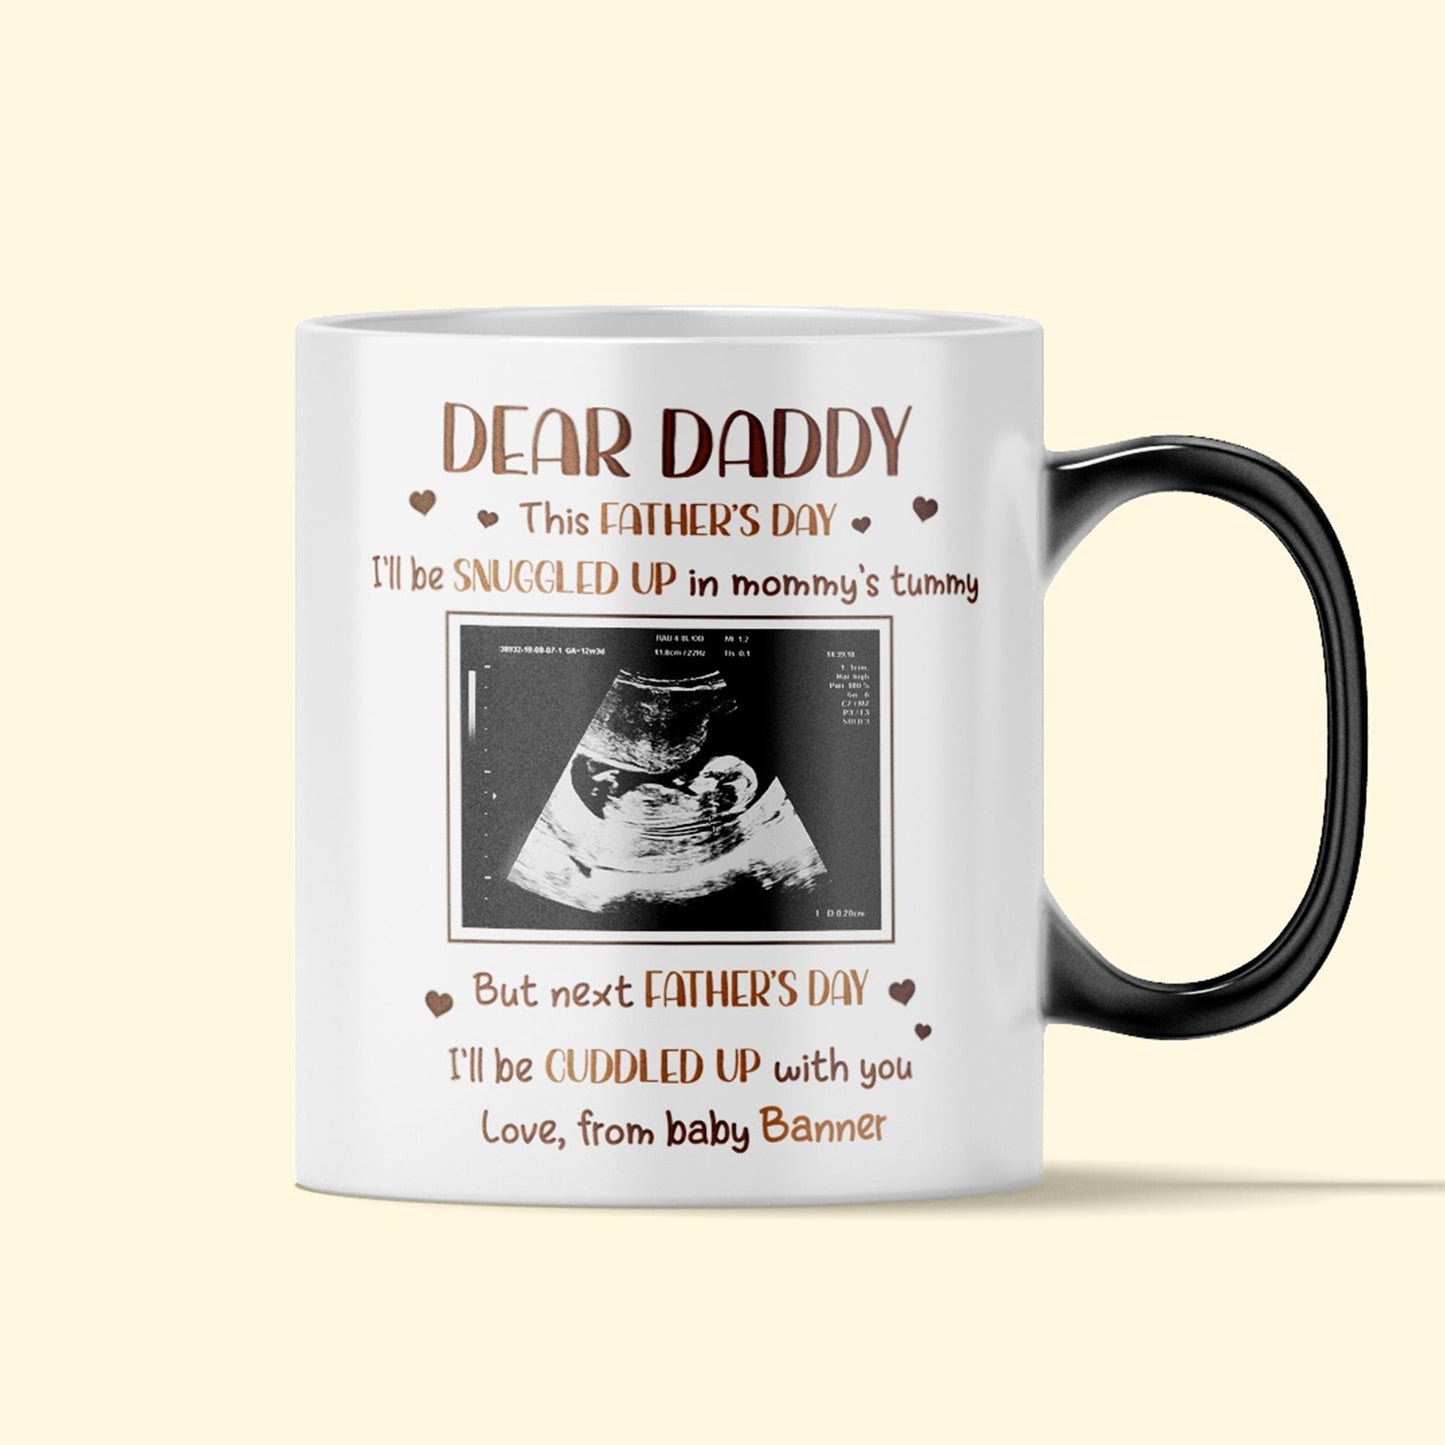 This Father's Day, I'll Be Snuggled Up In Mommy's Tummy - Personalized Color Changing Mug - Father's Day, Birthday, First Father's Day Gift For Daddy-To-Be Gift For Dad, Papa, Father, Daddy - From Bump, Baby